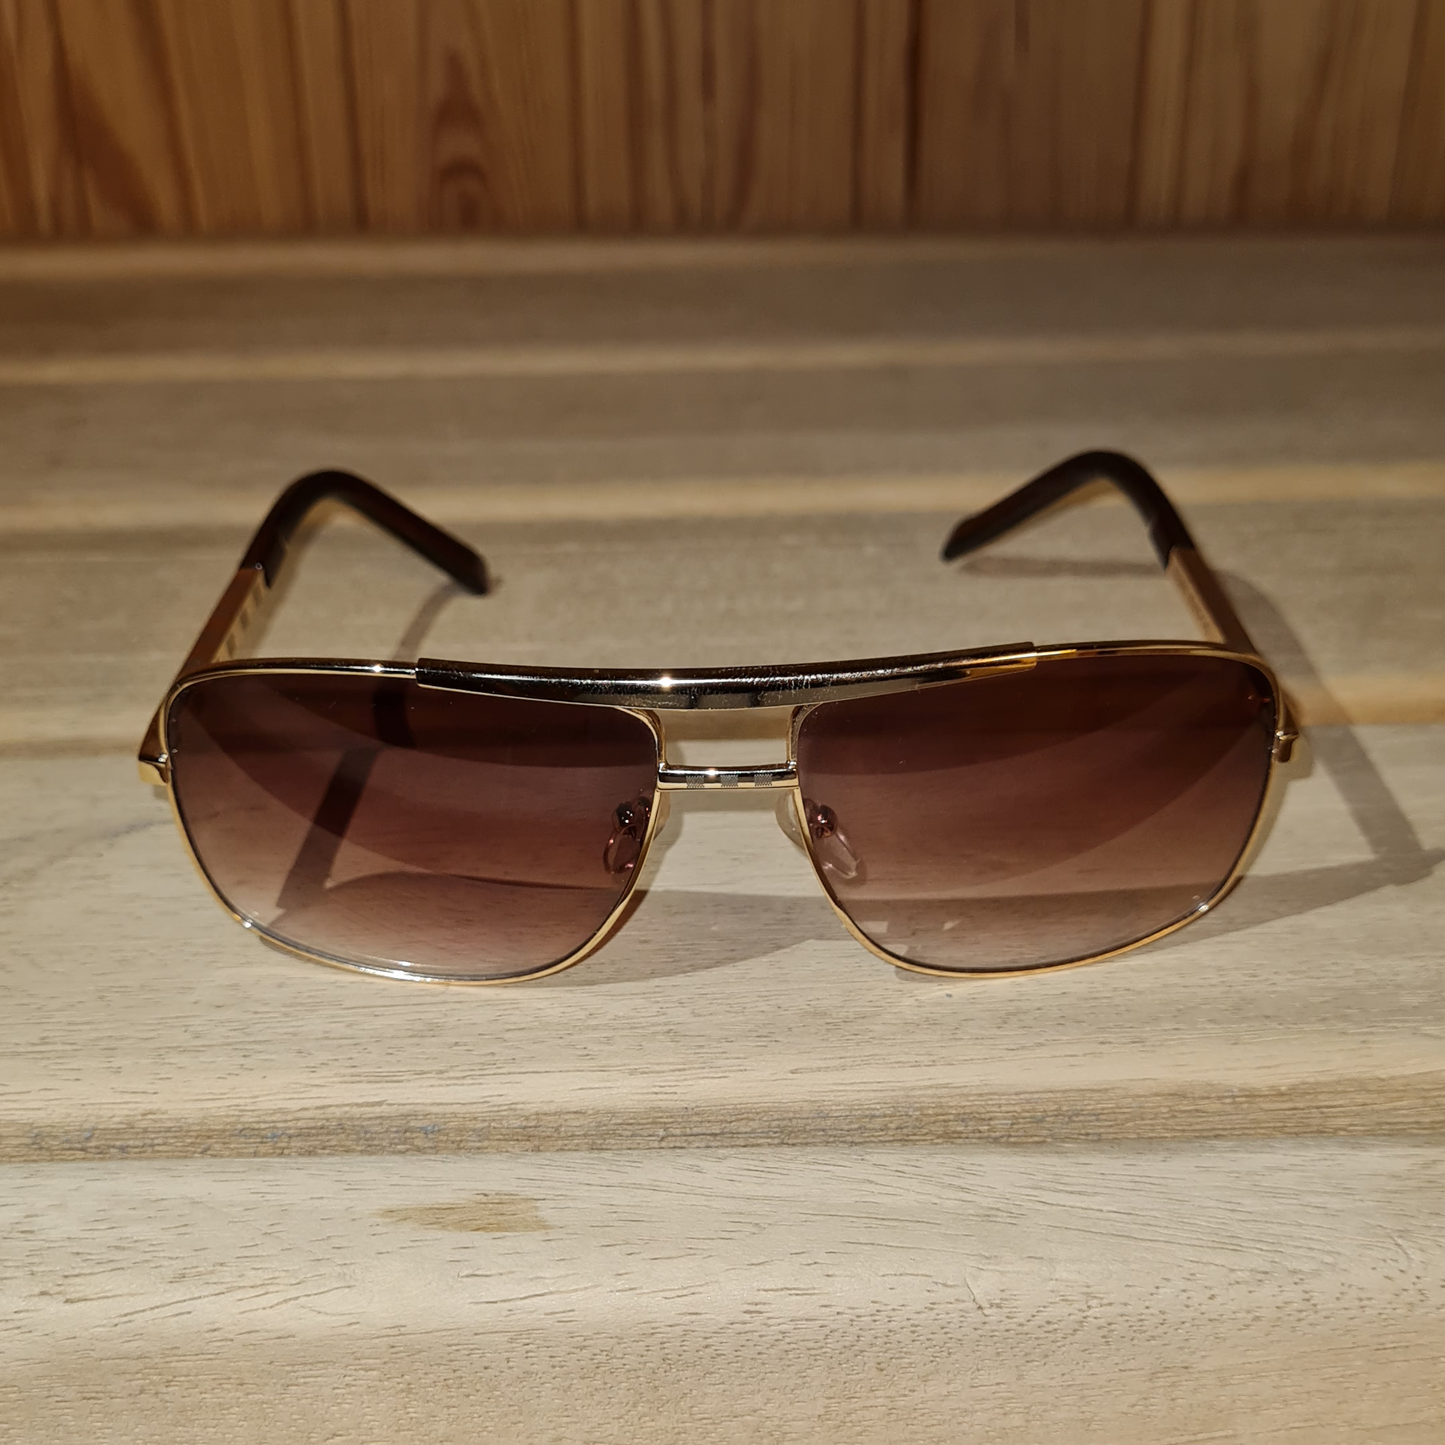 Andrew Tate Brown Sunglasses Top G Style Brand New